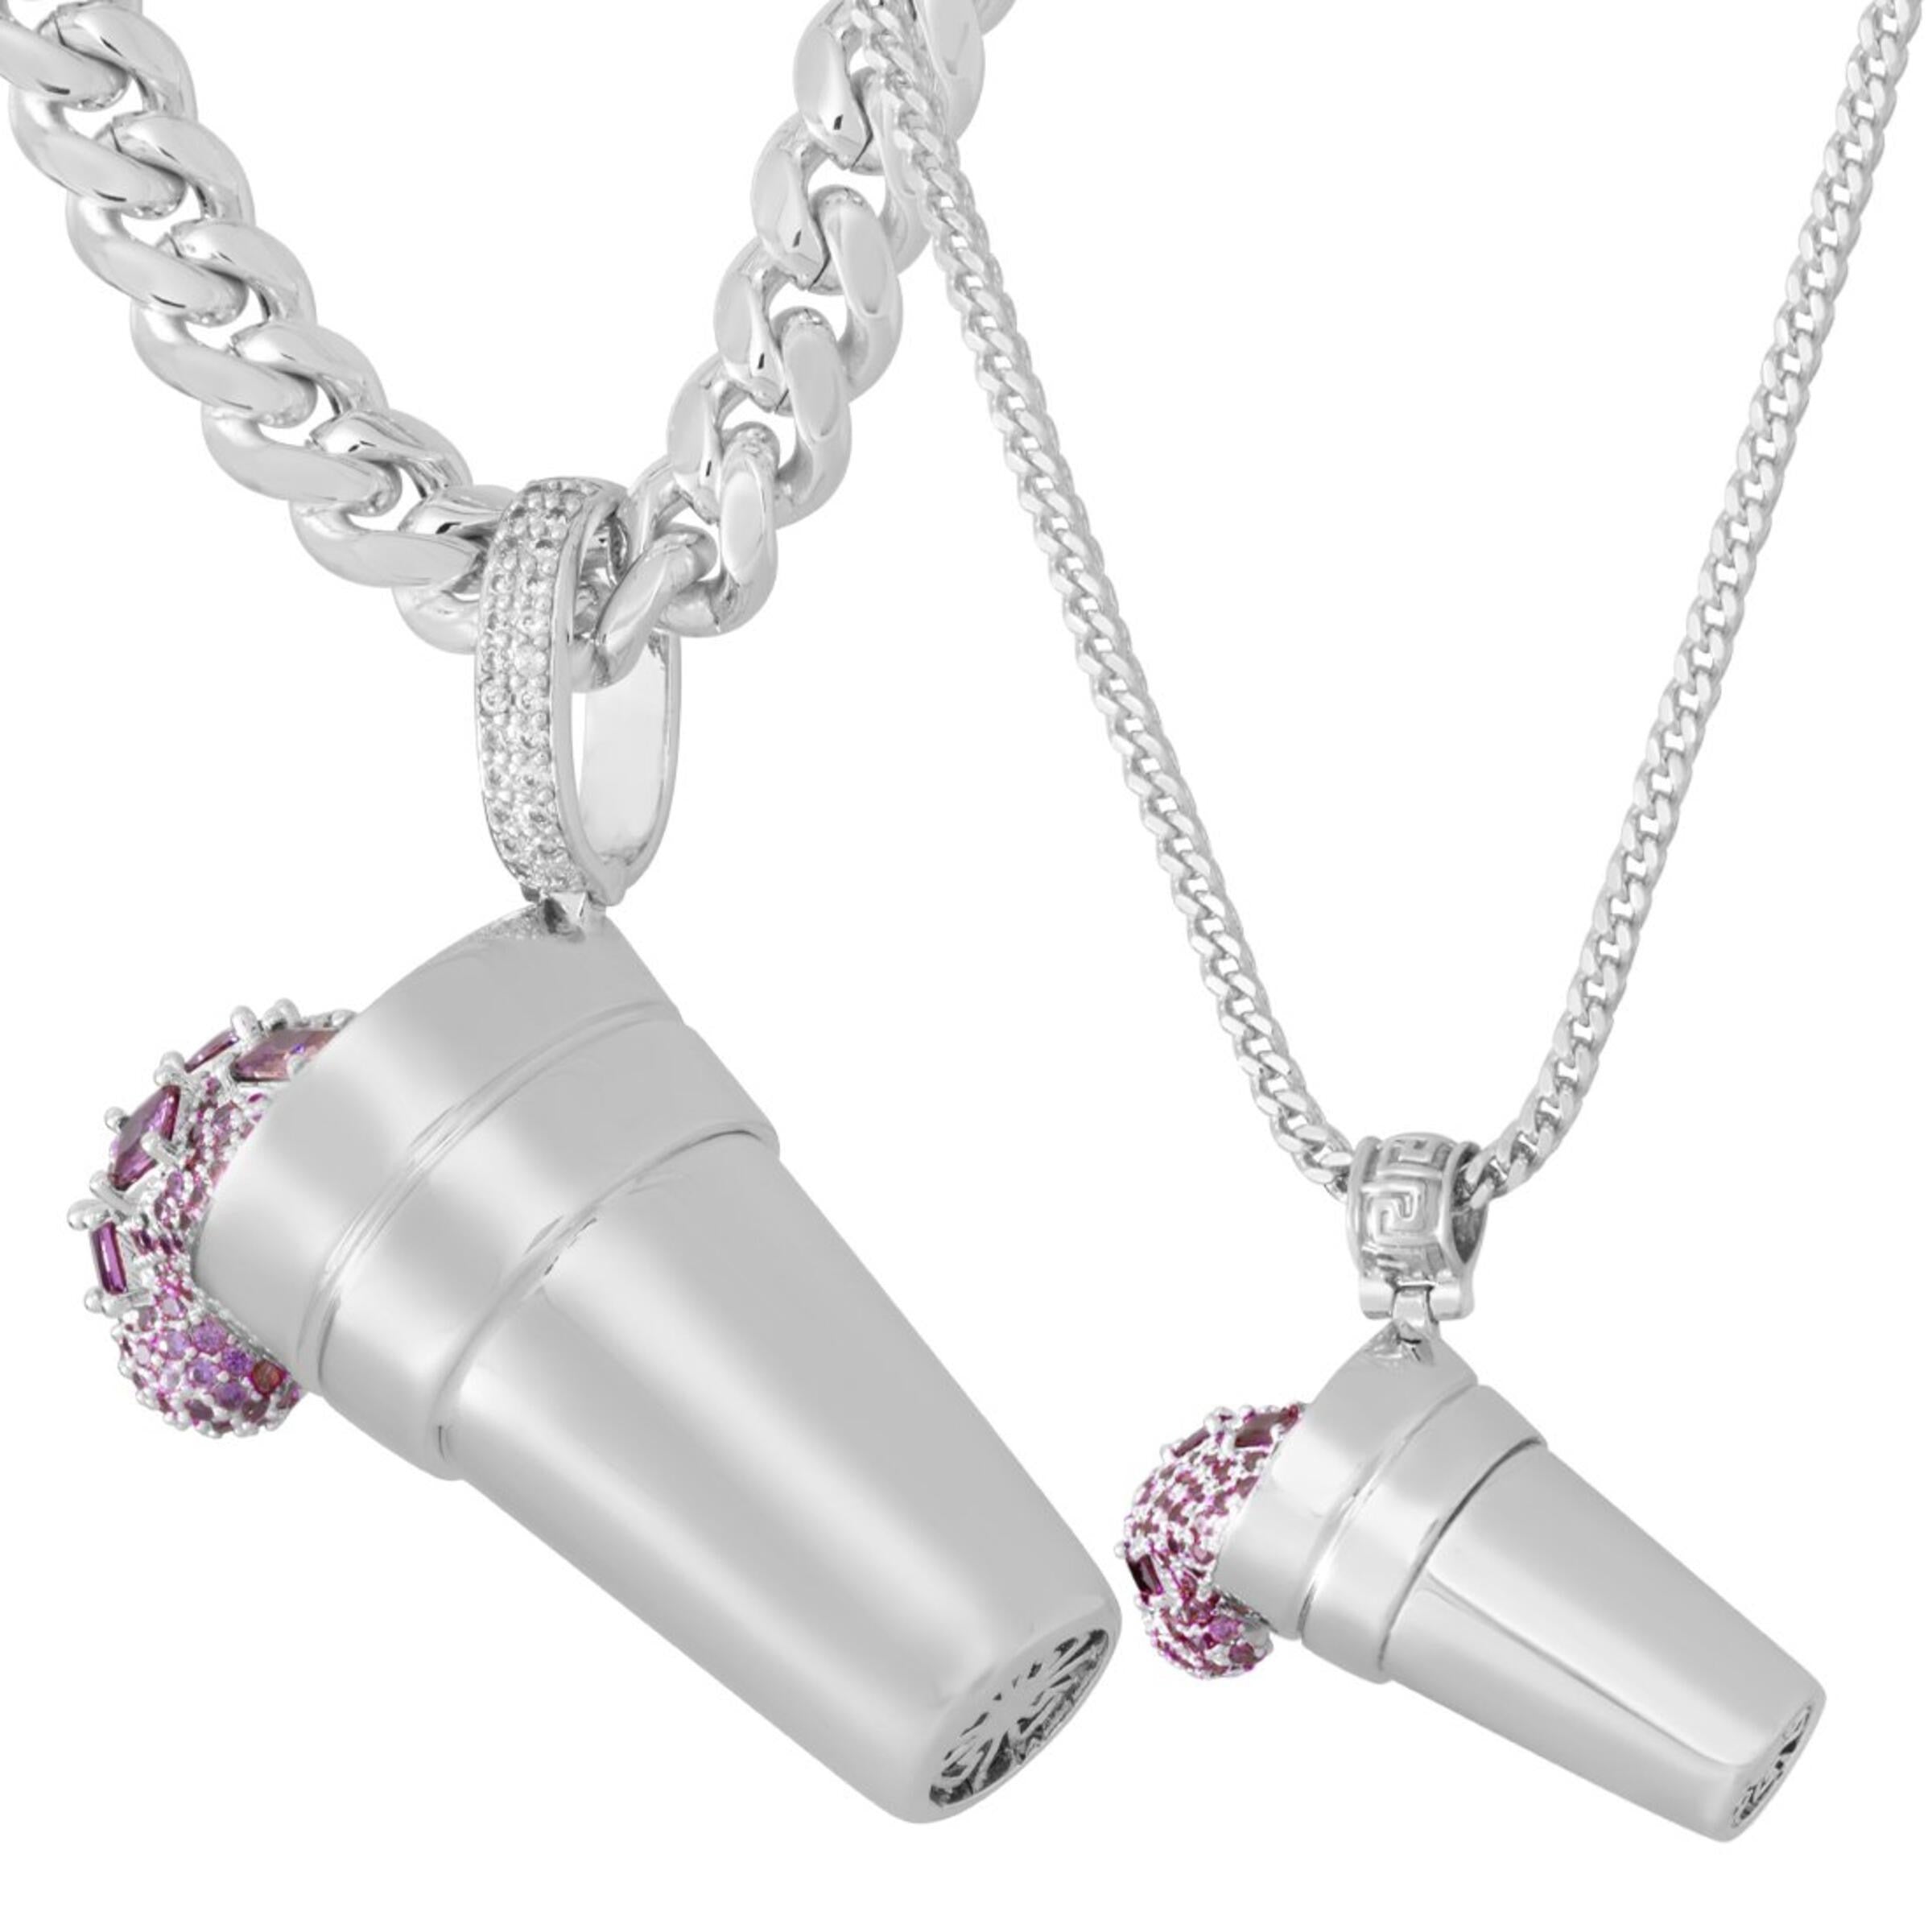 King Ice Purple Drank Necklace - White Gold